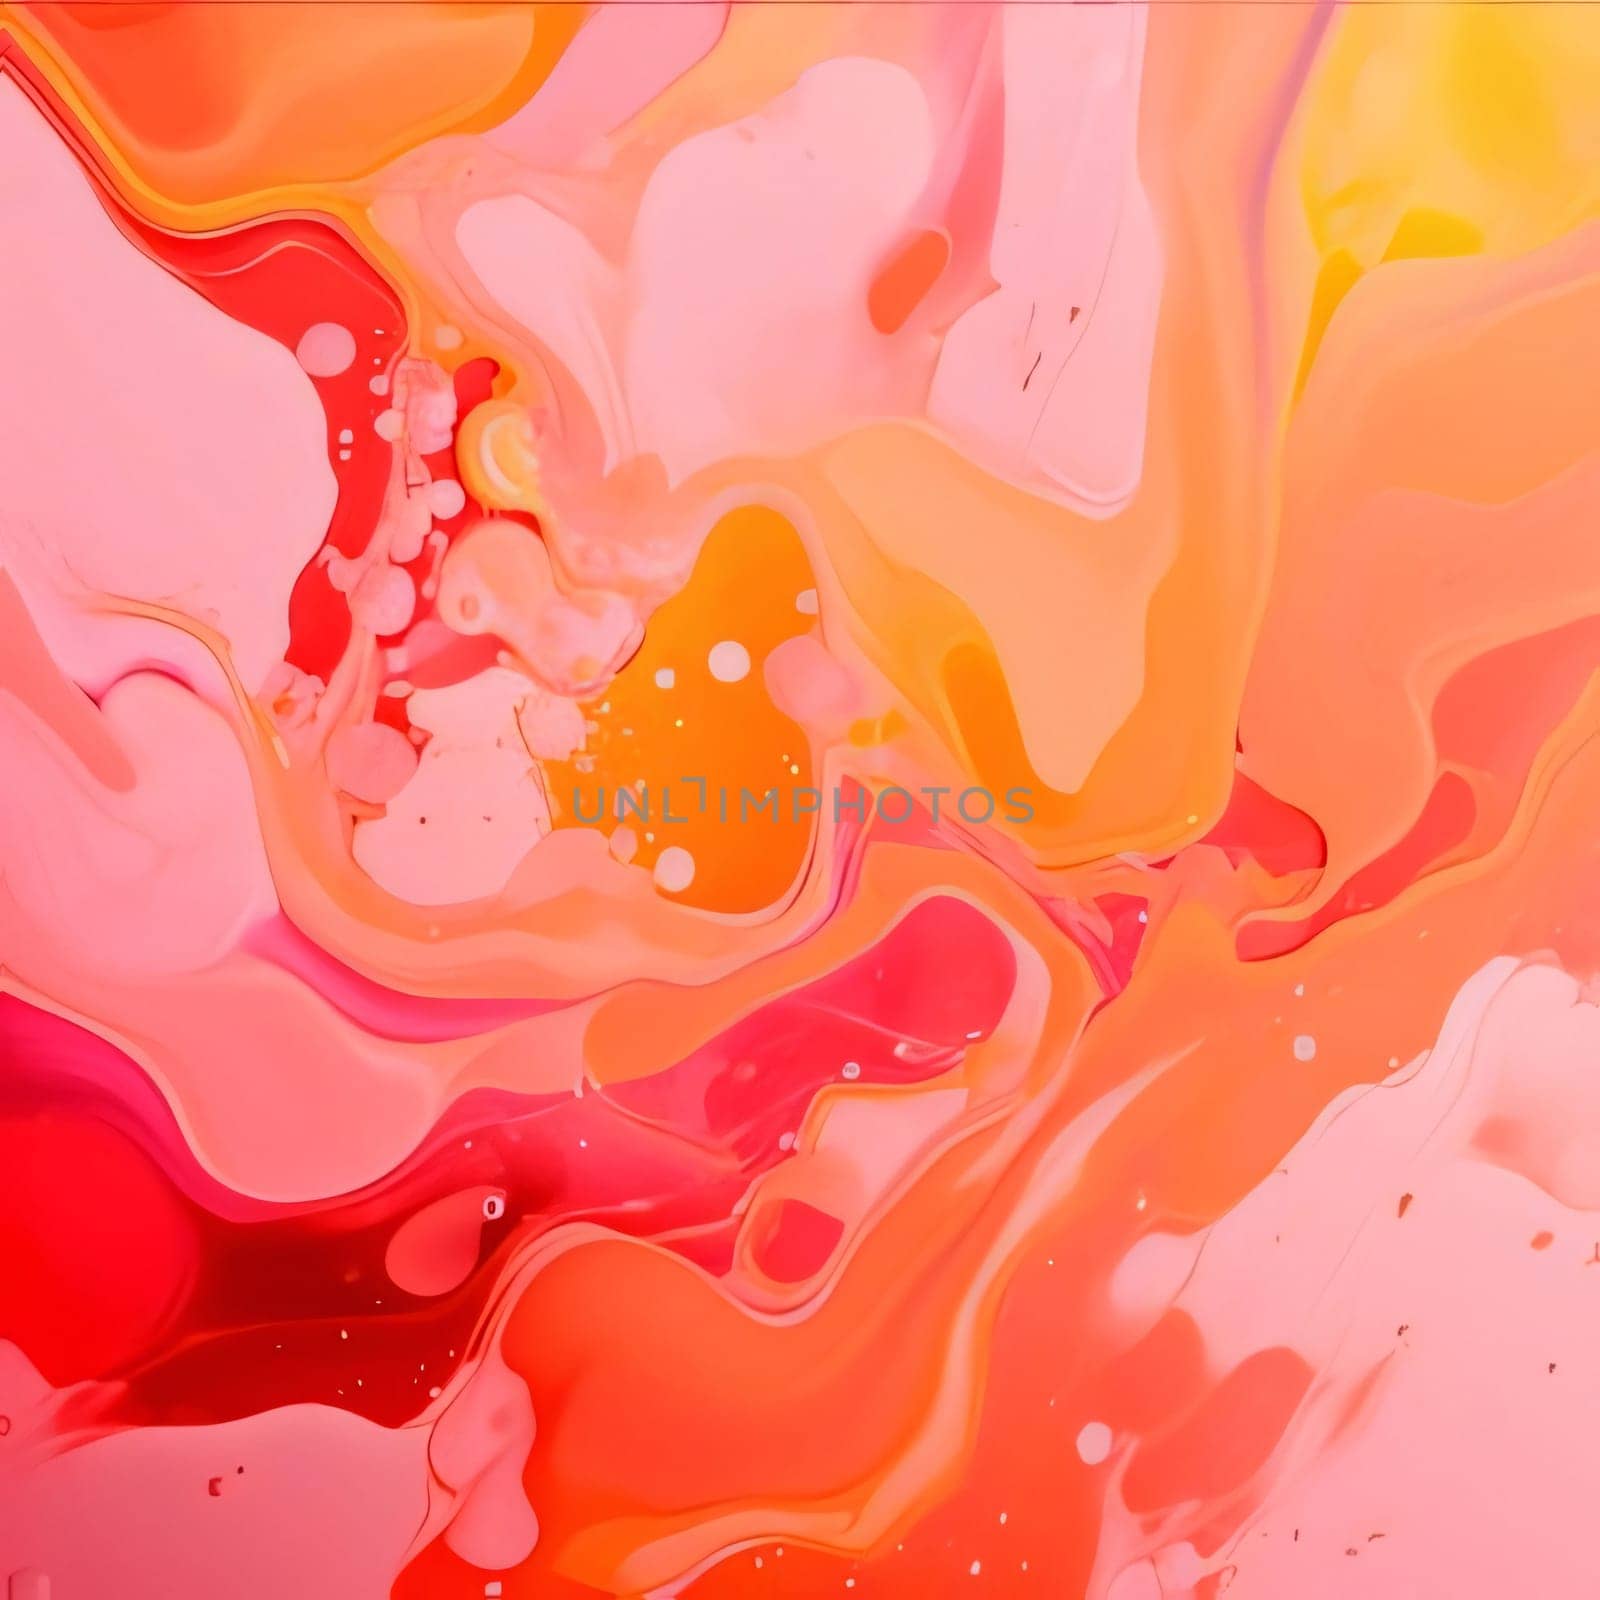 Abstract background design: abstract background of red, orange and yellow paint mixing in water